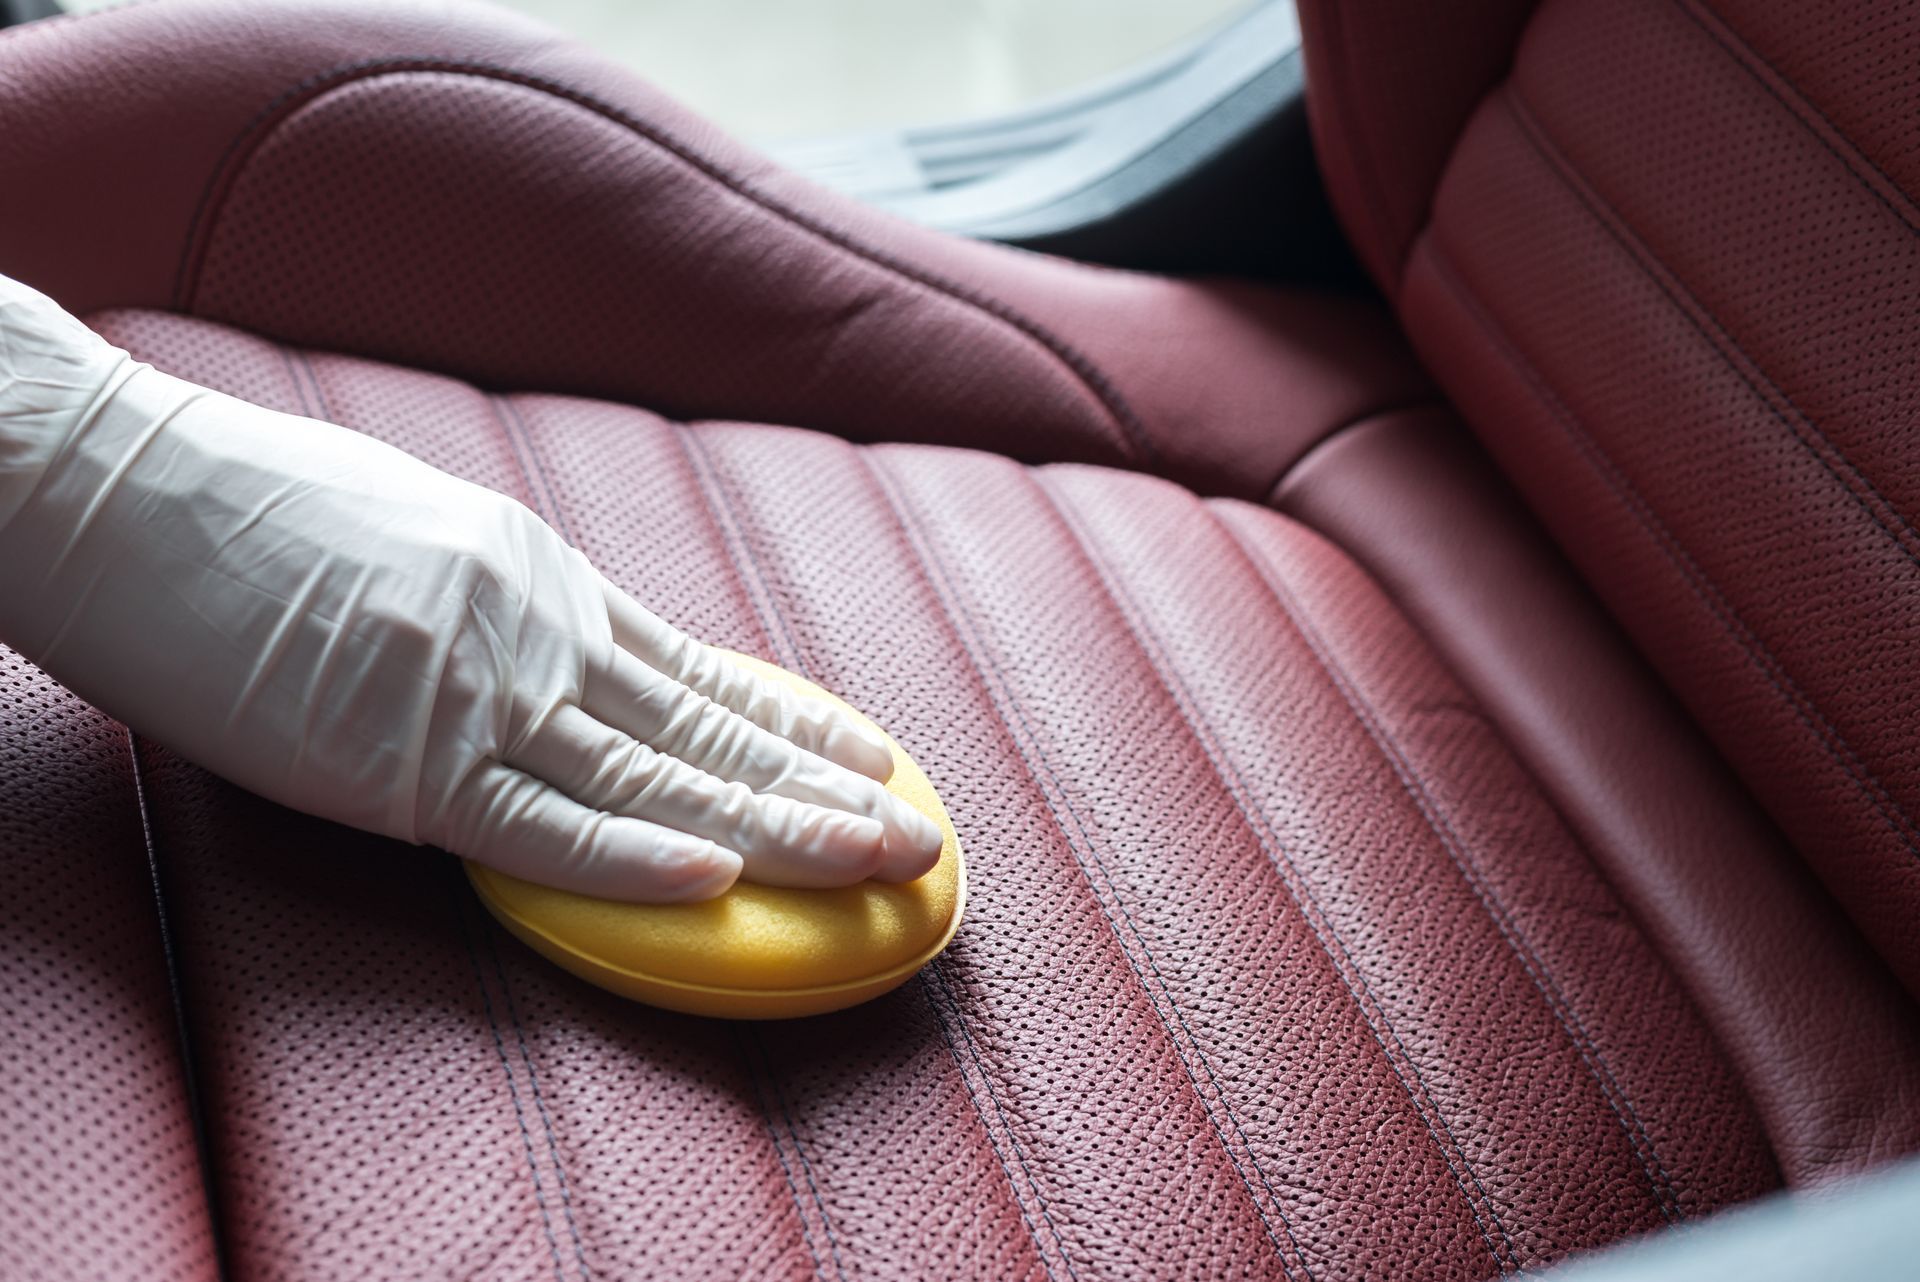 Interior Coating - A person wearing gloves is cleaning a red leather seat with a yellow sponge